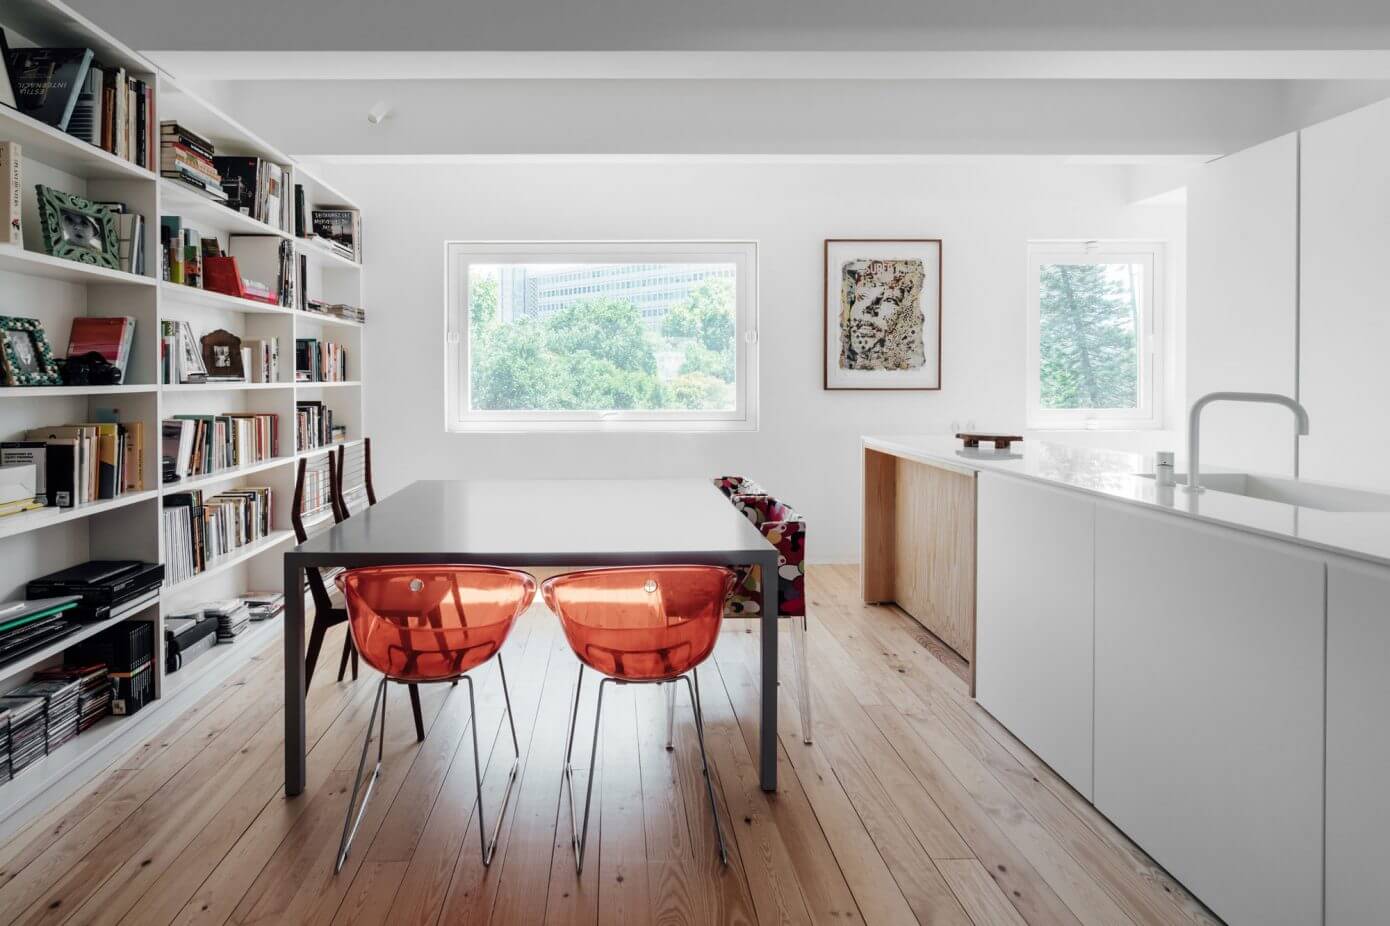 Apartment Remodel by Atelier Data